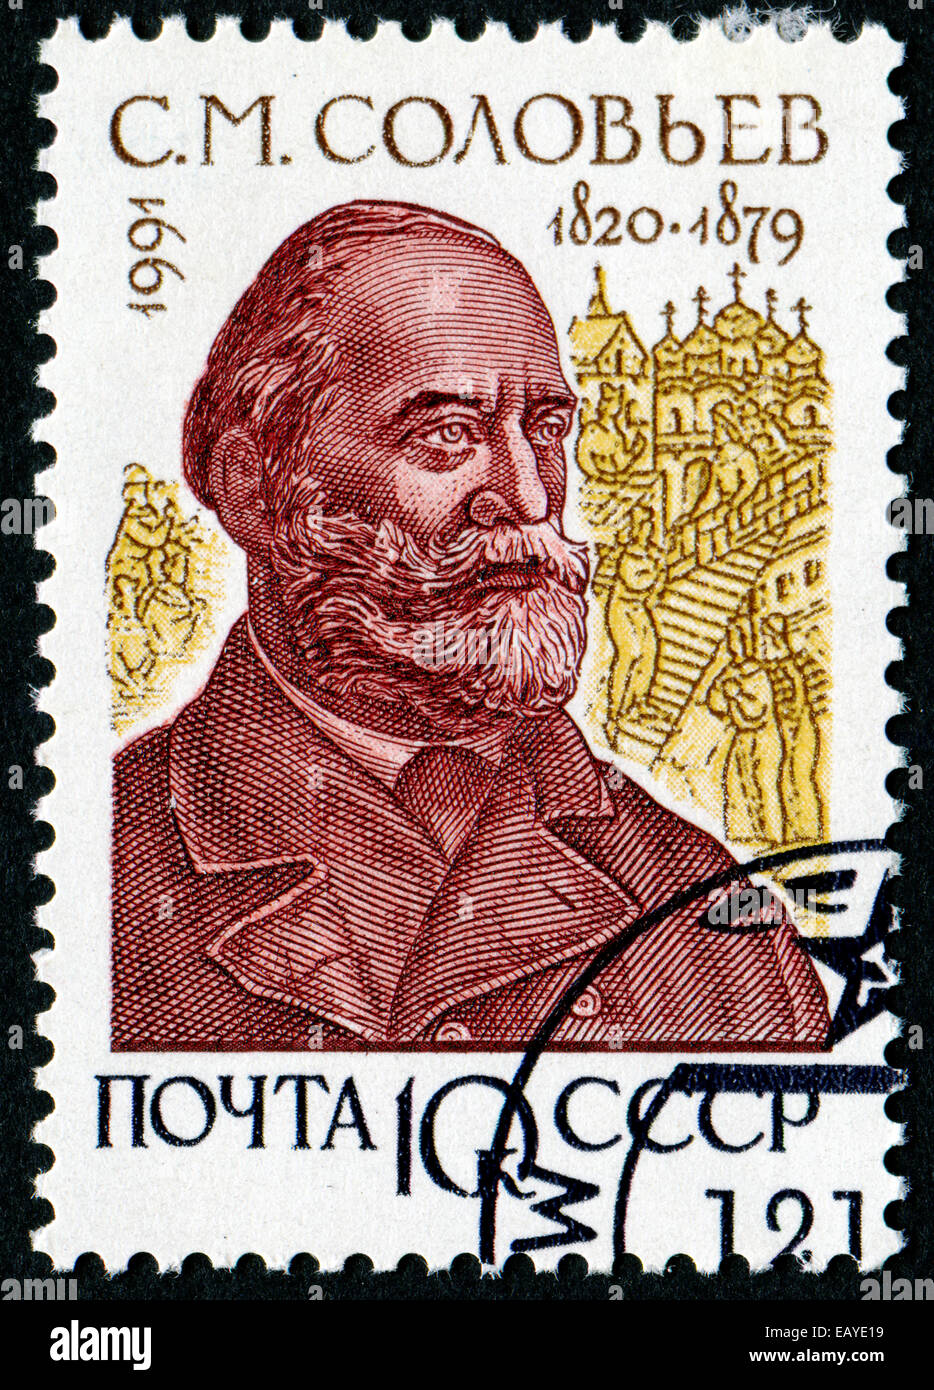 USSR - CIRCA 1991: A stamp printed in USSR shows Soloviev (1820-1879), series Russian Historians, circa 1991 Stock Photo